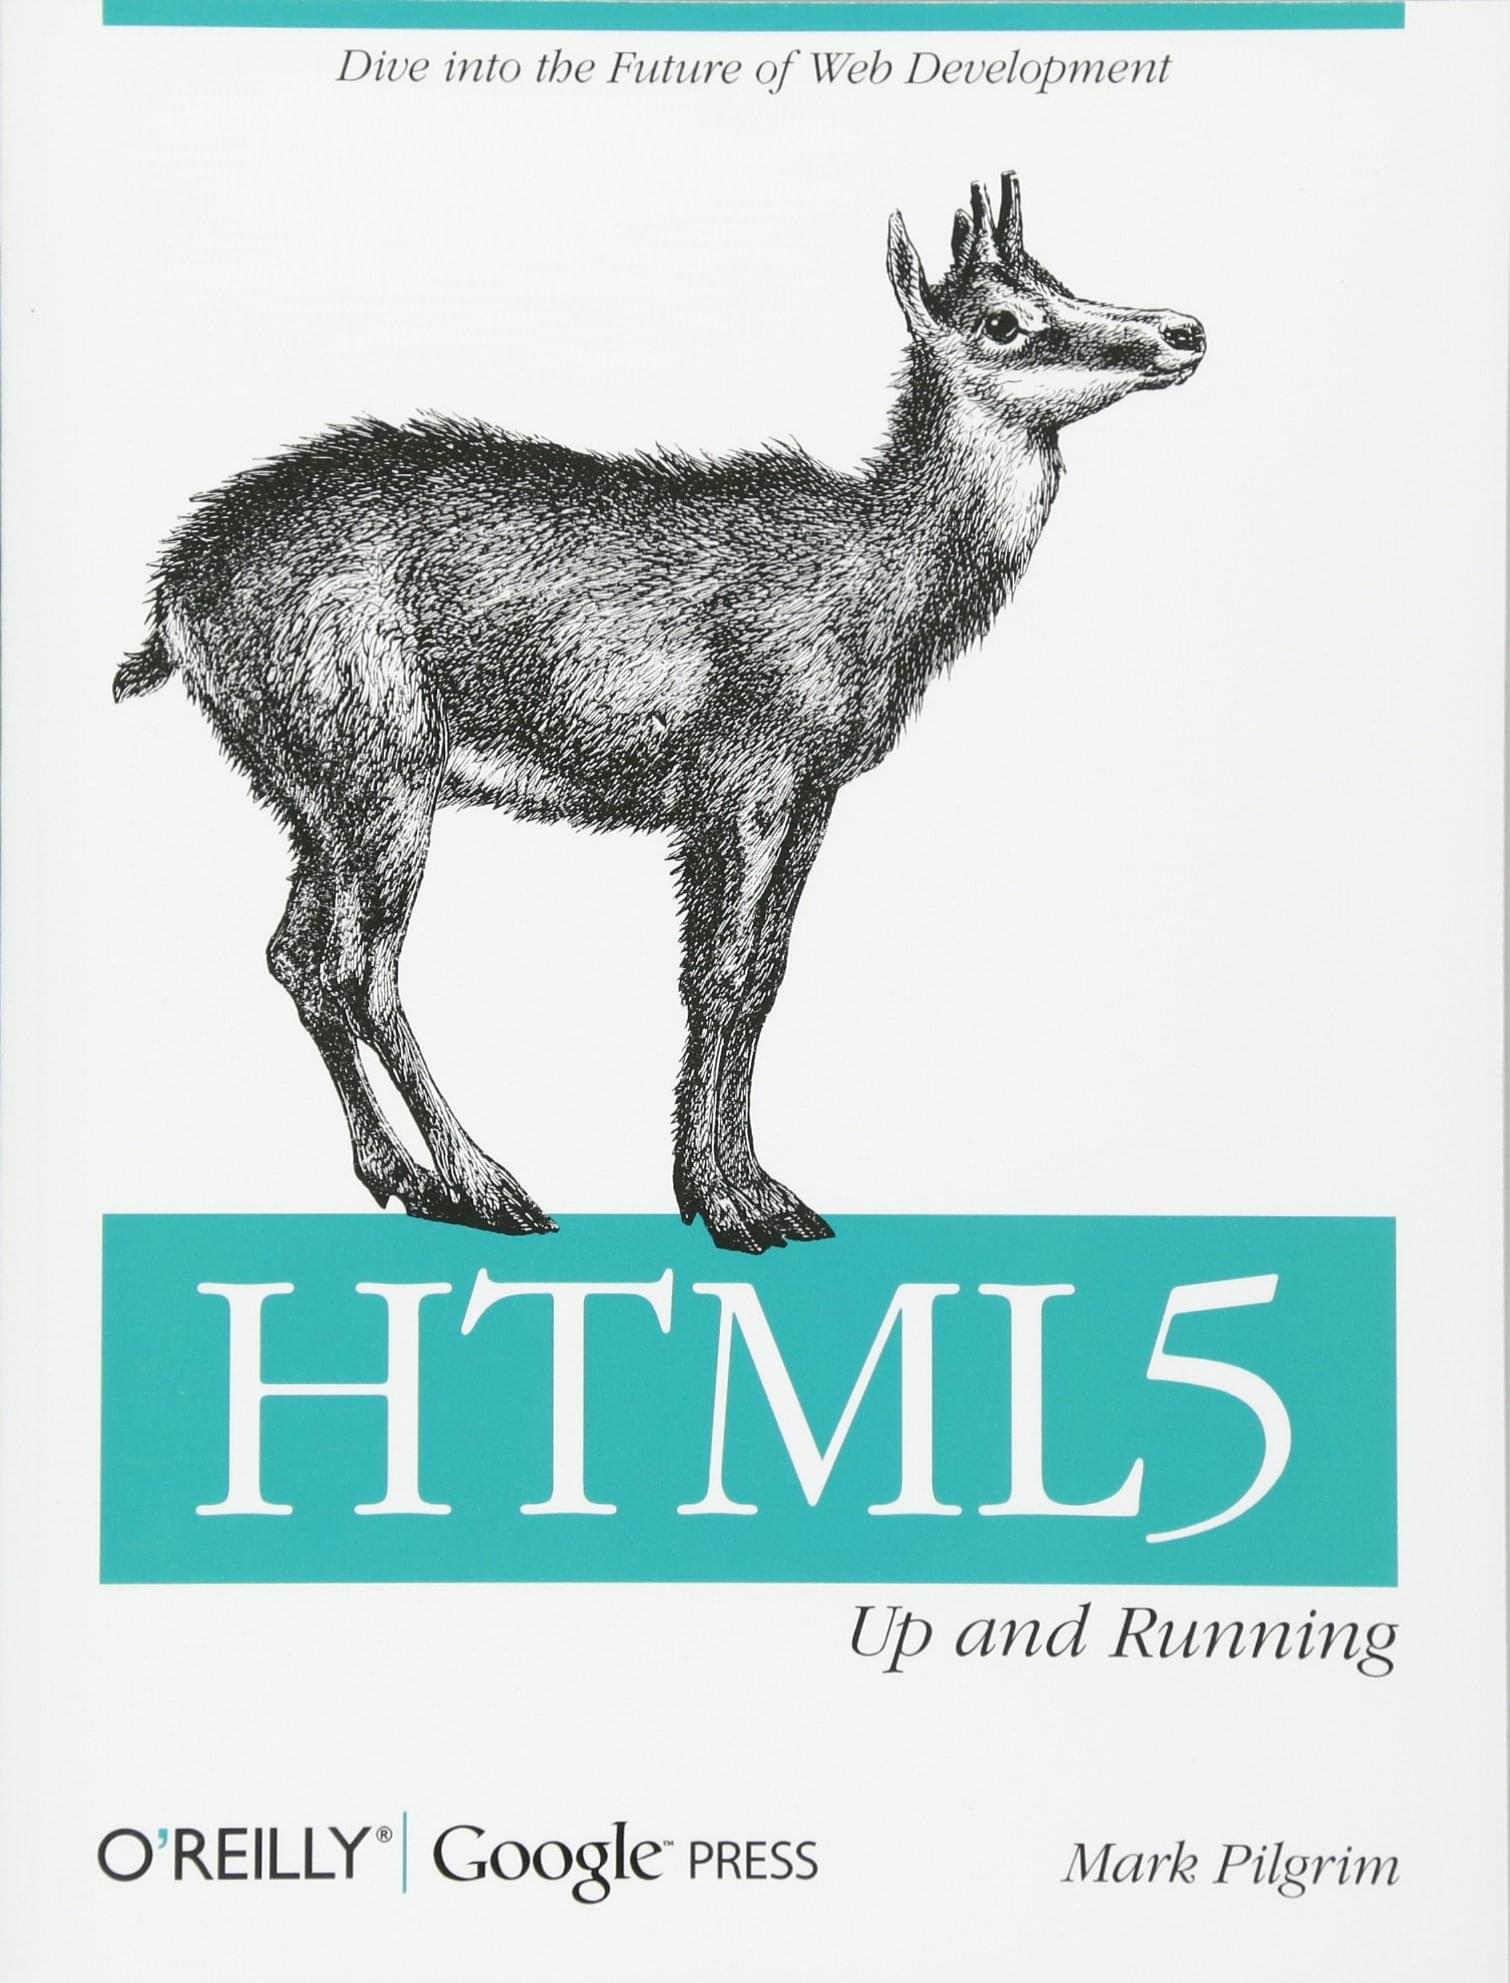 HTML5 Up and Running - cover image